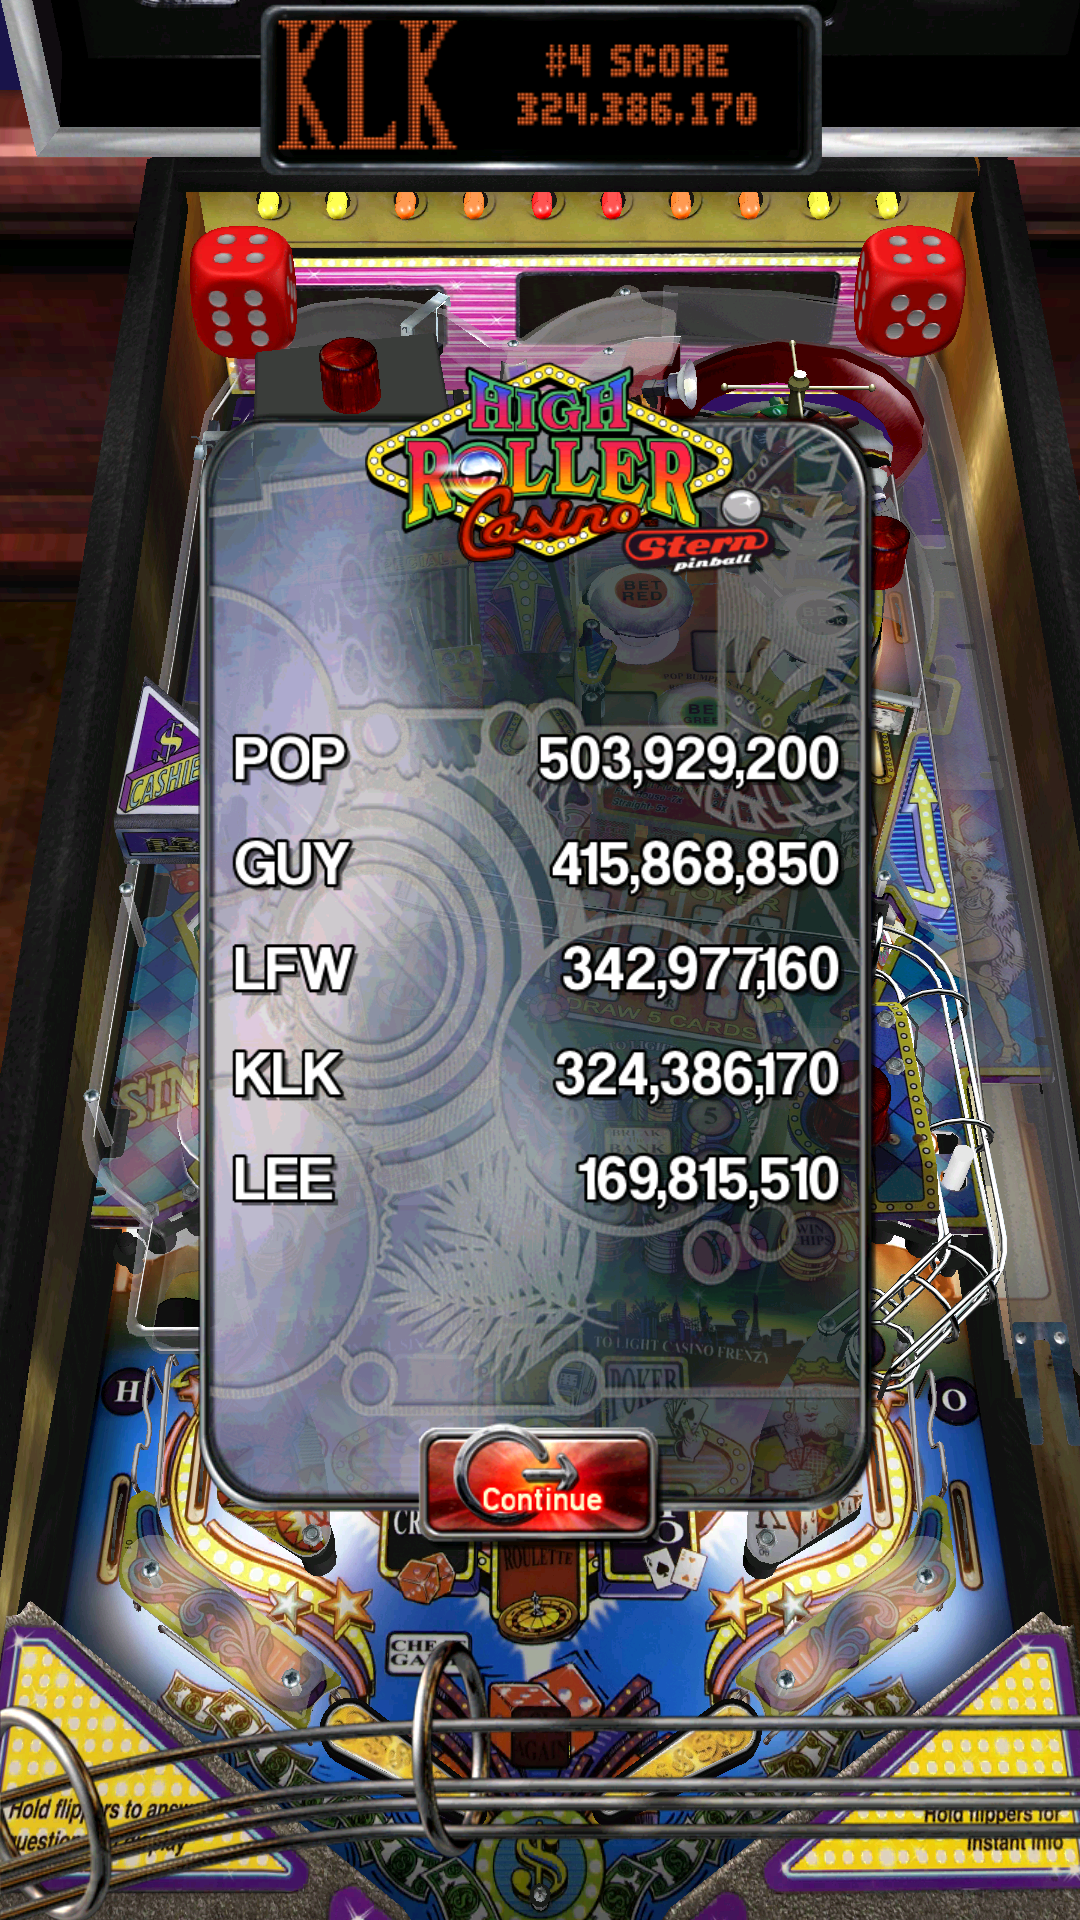 LeeJ07: Pinball Arcade: High Roller Casino (Android) 169,815,510 points on 2015-07-12 12:42:42